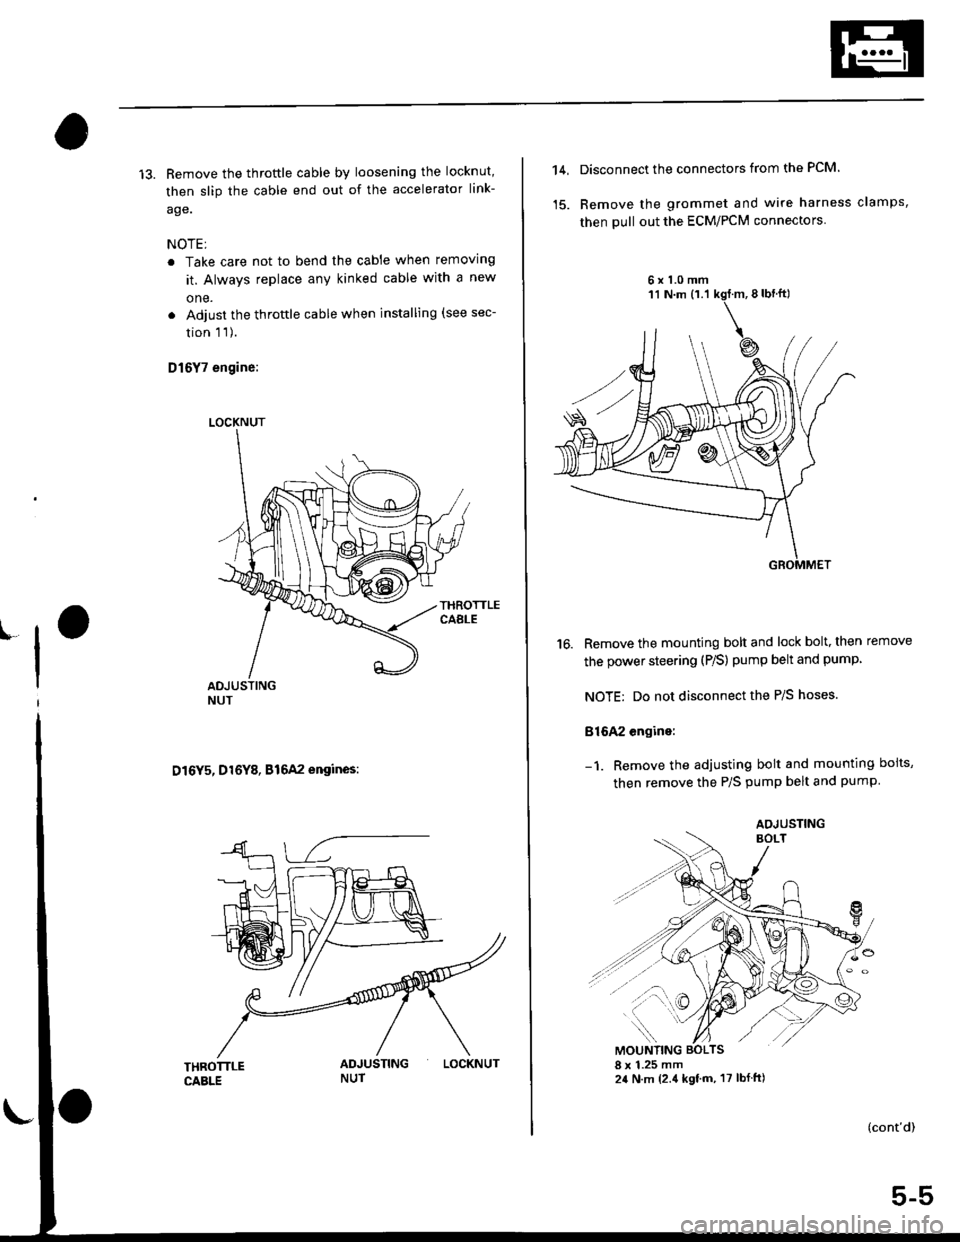 HONDA CIVIC 2000 6.G Workshop Manual 13. Remove the throftle cable by loosening the locknut,
then slip the cable end out of the accelerator link-
age.
NOTE;
. Take care not to bend the cable when removing
it. Always replace any kinked ca